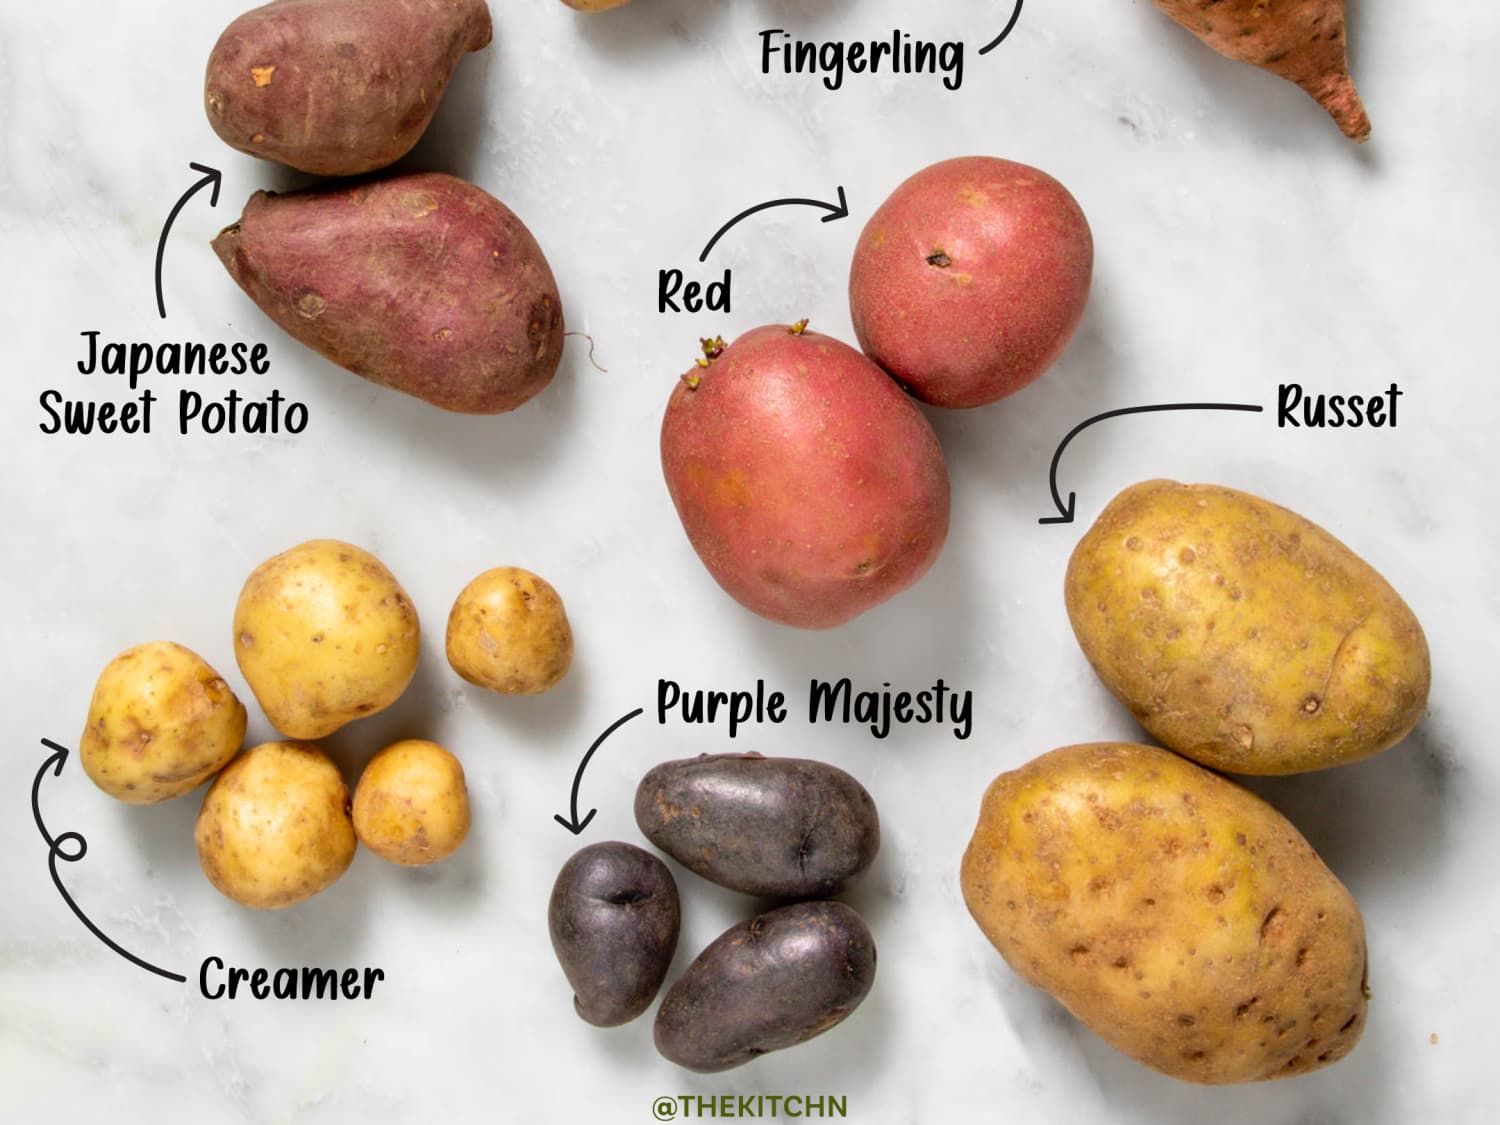 White Rose Potatoes Information and Facts